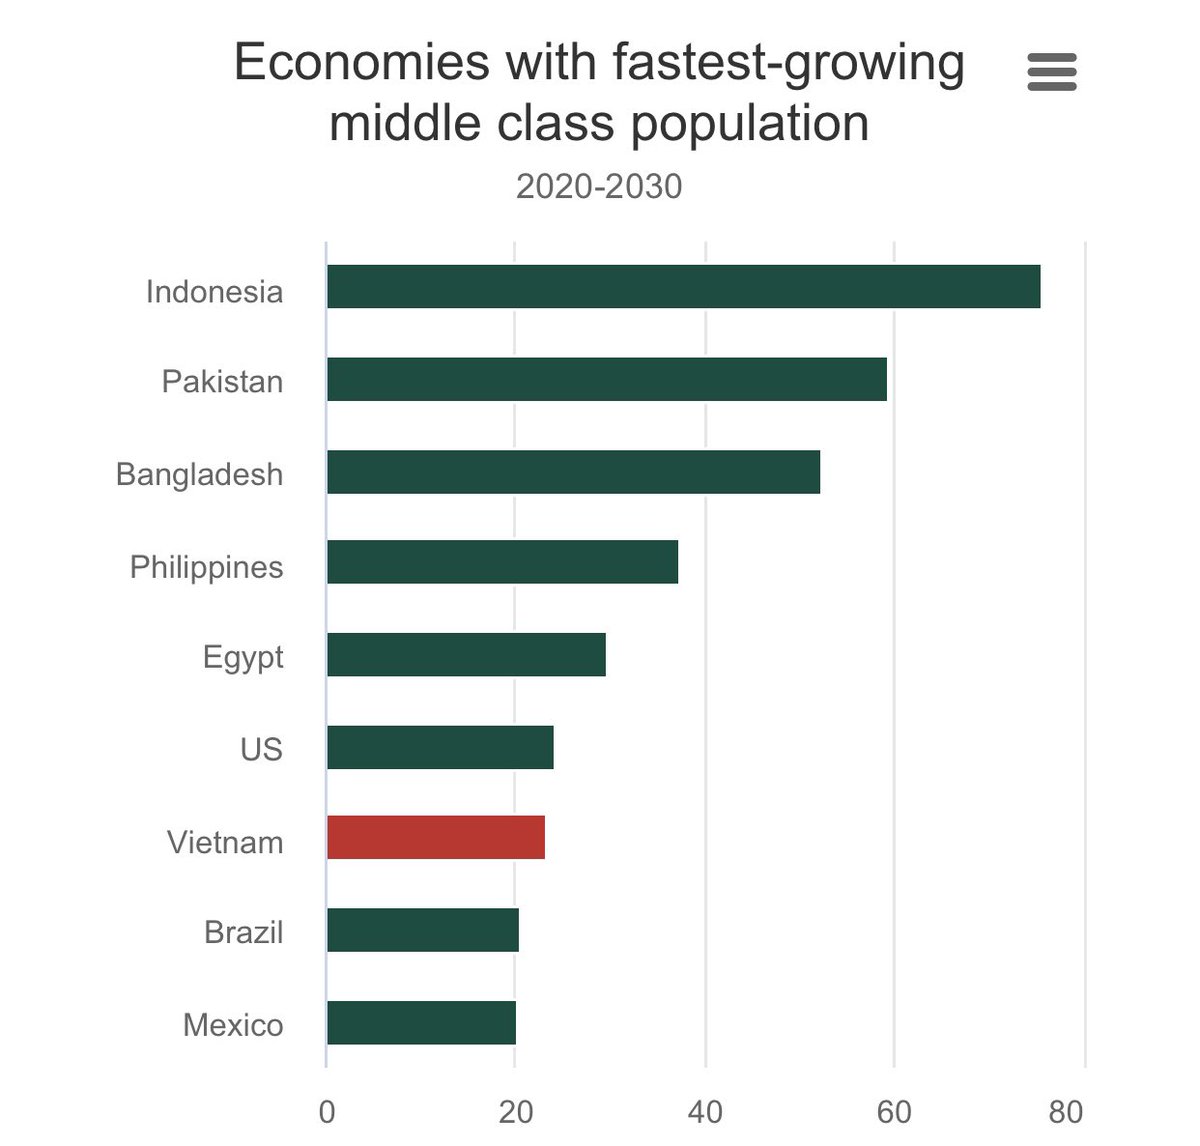 UK-based analytical NGO and data refinery enterprise #WorldDataLab forecasts — With 59.5 million people joining the demographic by 2030, #Pakistan is ranked 2nd among 9 nations with #FastestGrowing middle class populations in the coming decade.
#EmergingPakistan